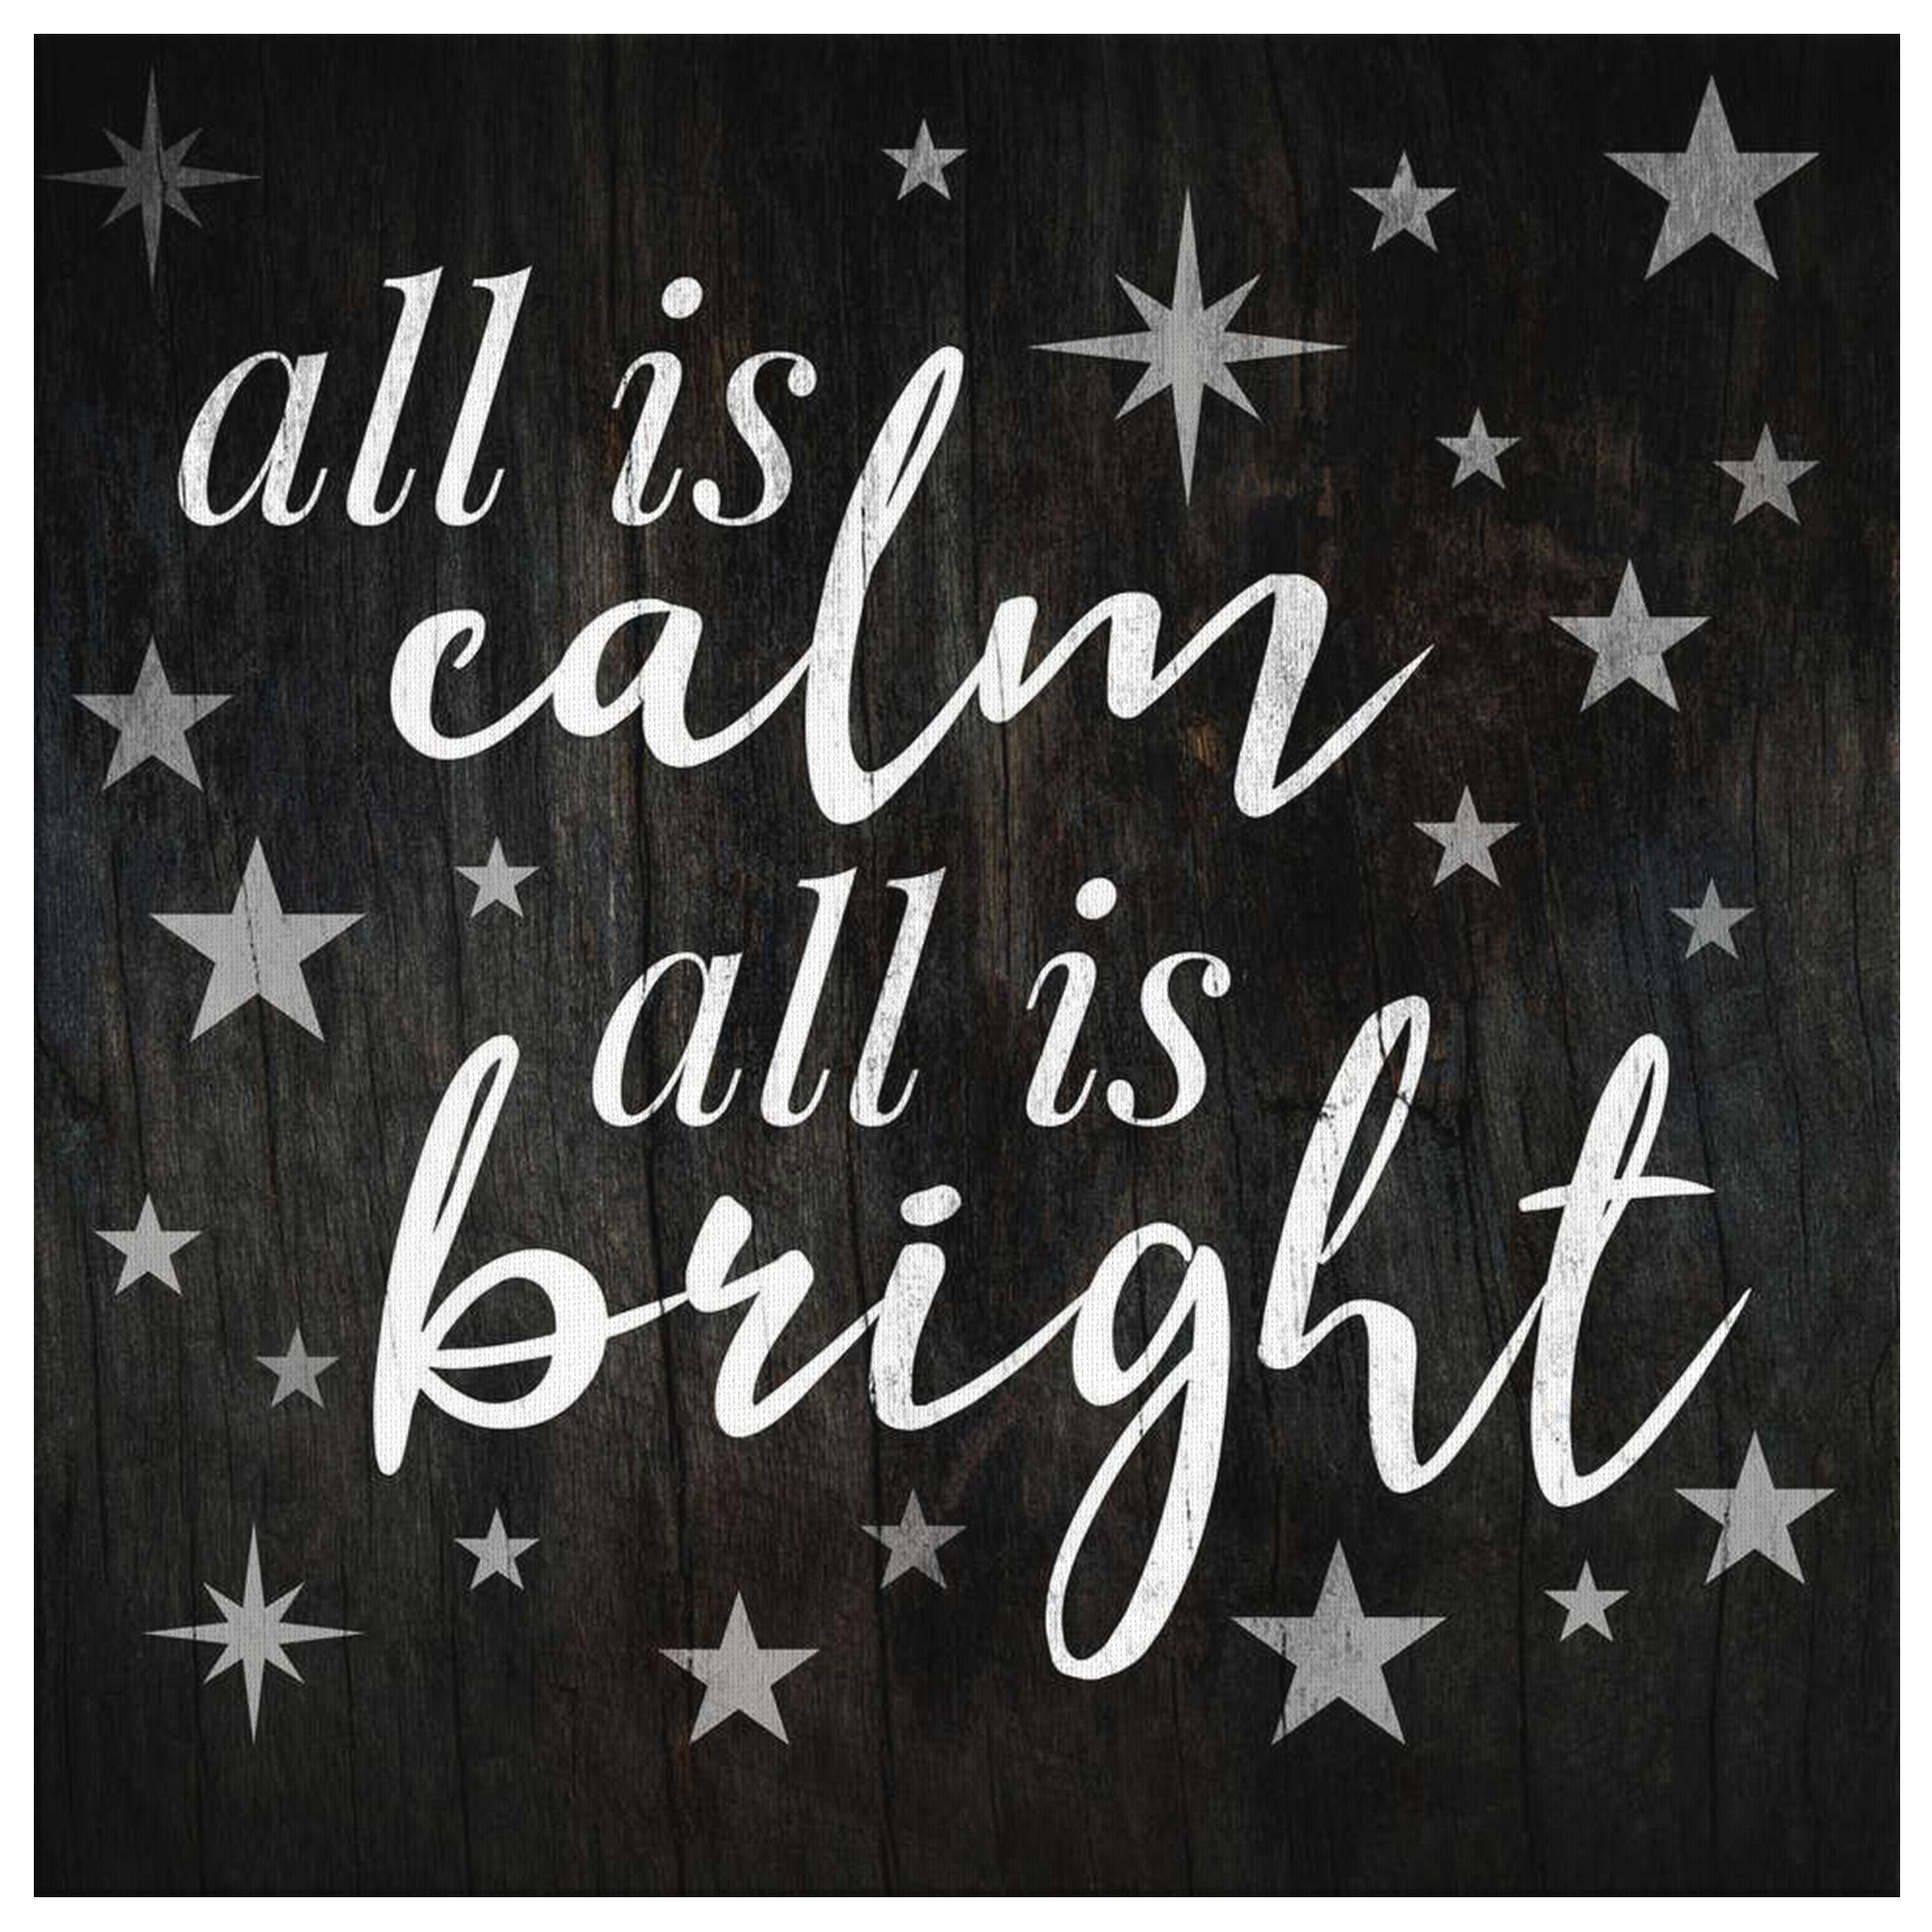 "All Is Calm All Is Bright" Premium Canvas